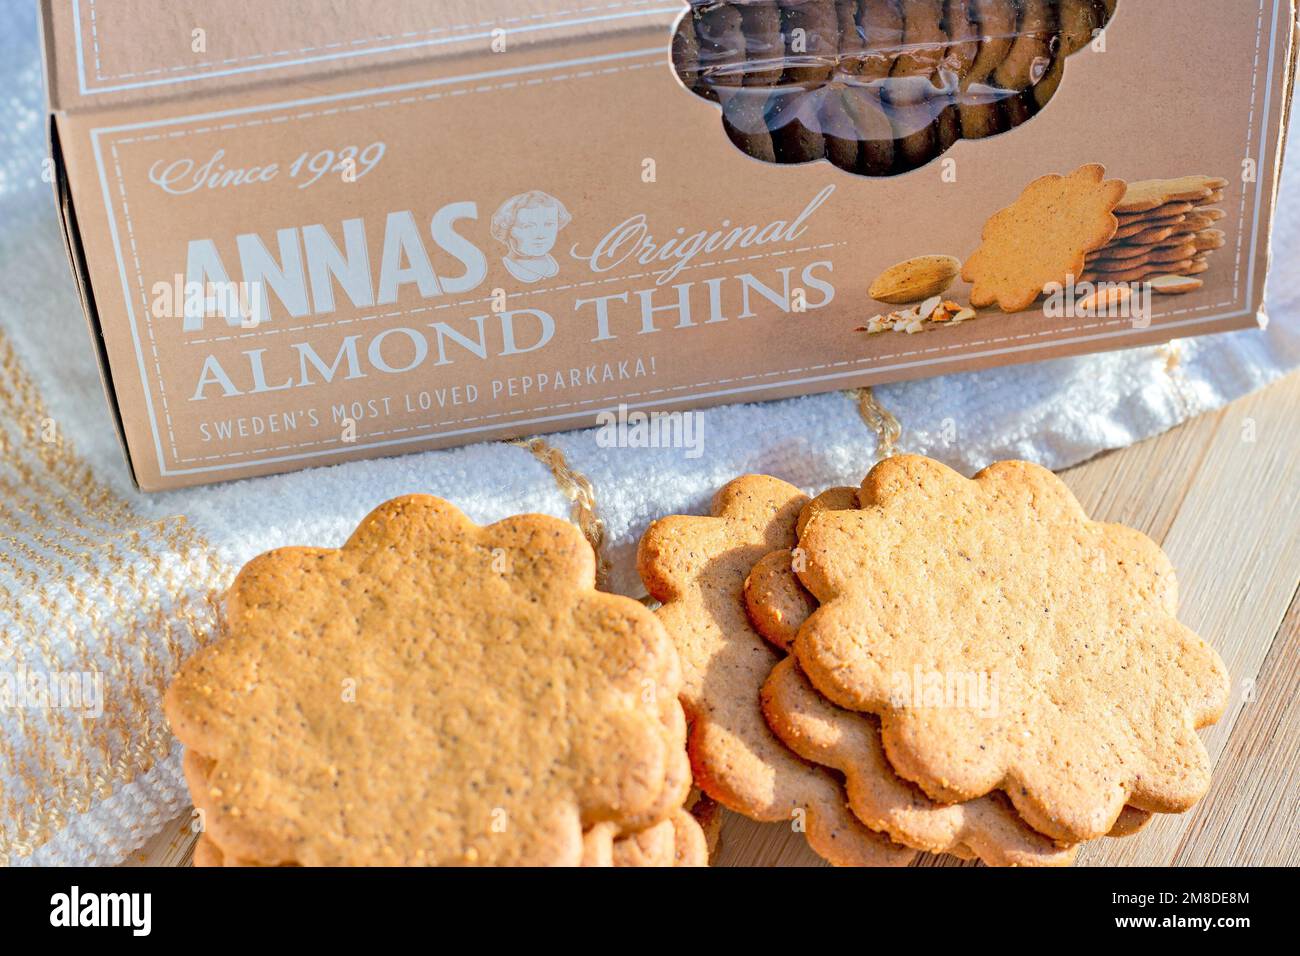 DUSHANBE, TAJIKISTAN - AUGUST 18, 2022: Sweet Swedish Annas Original Almond thins with ginger and cinnamon (Pepparkaka or Pepparkakor biscuits) on lig Stock Photo